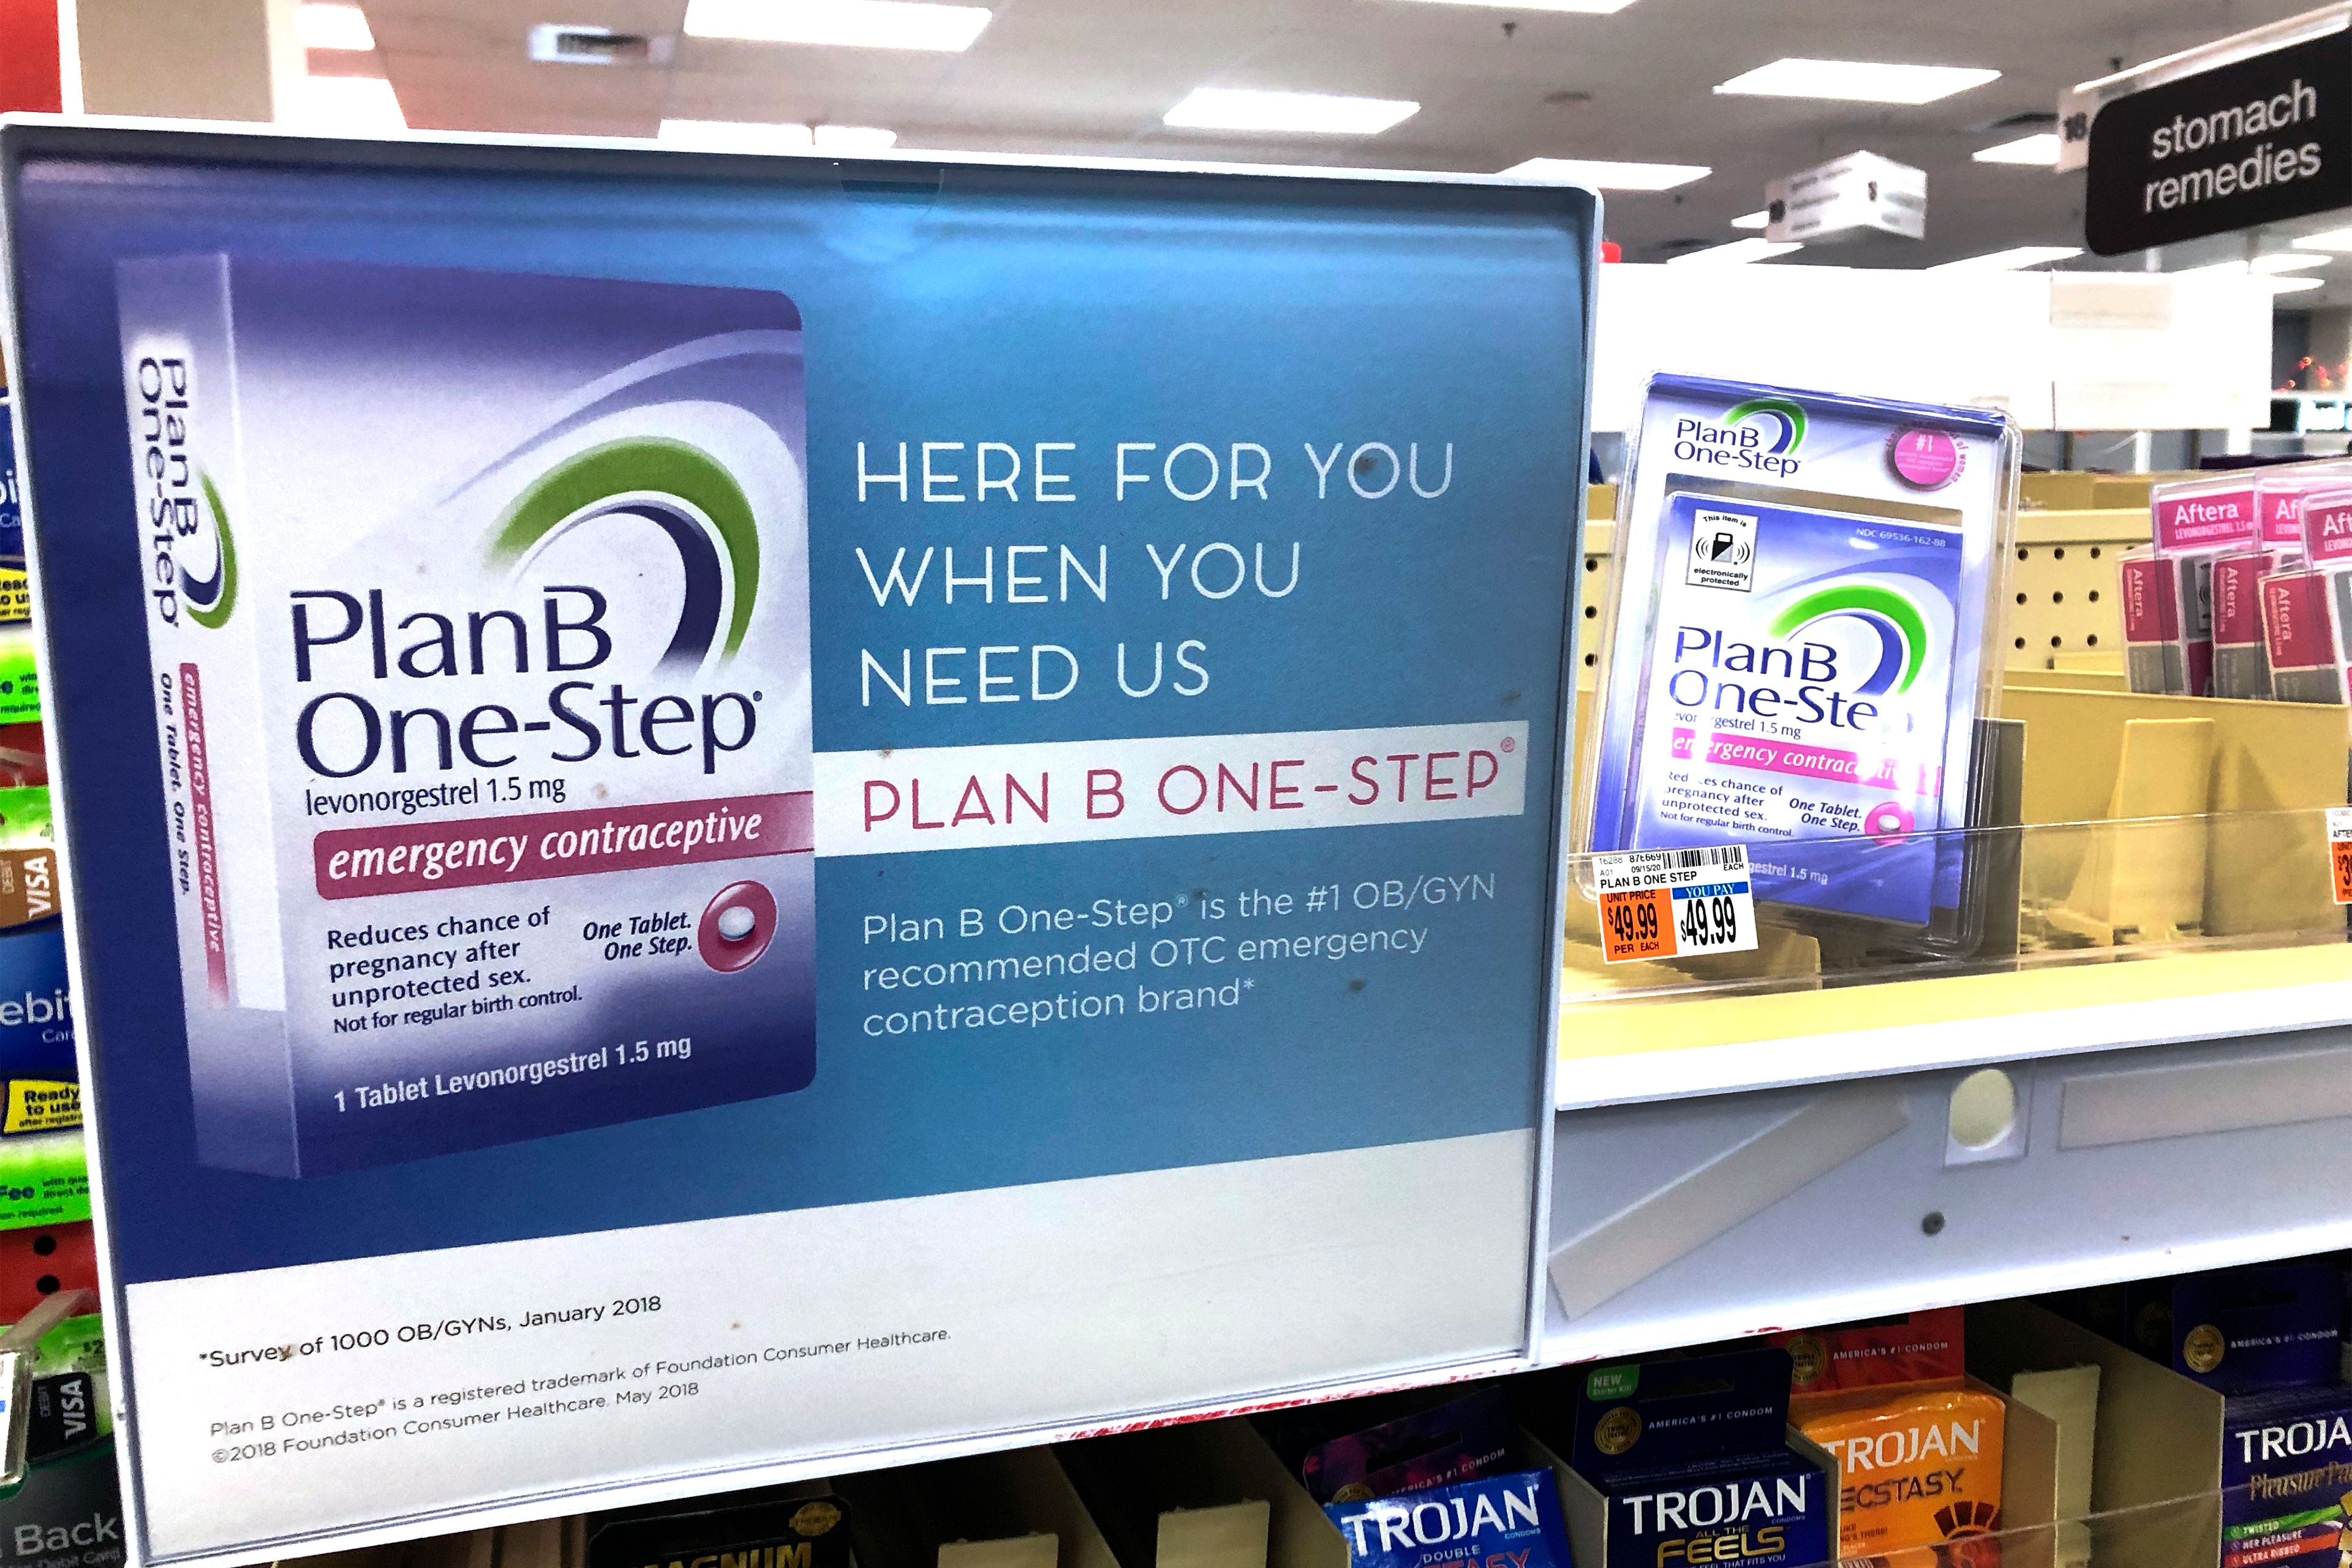 Misinformation Clouds America’s Most Popular Emergency Contraception